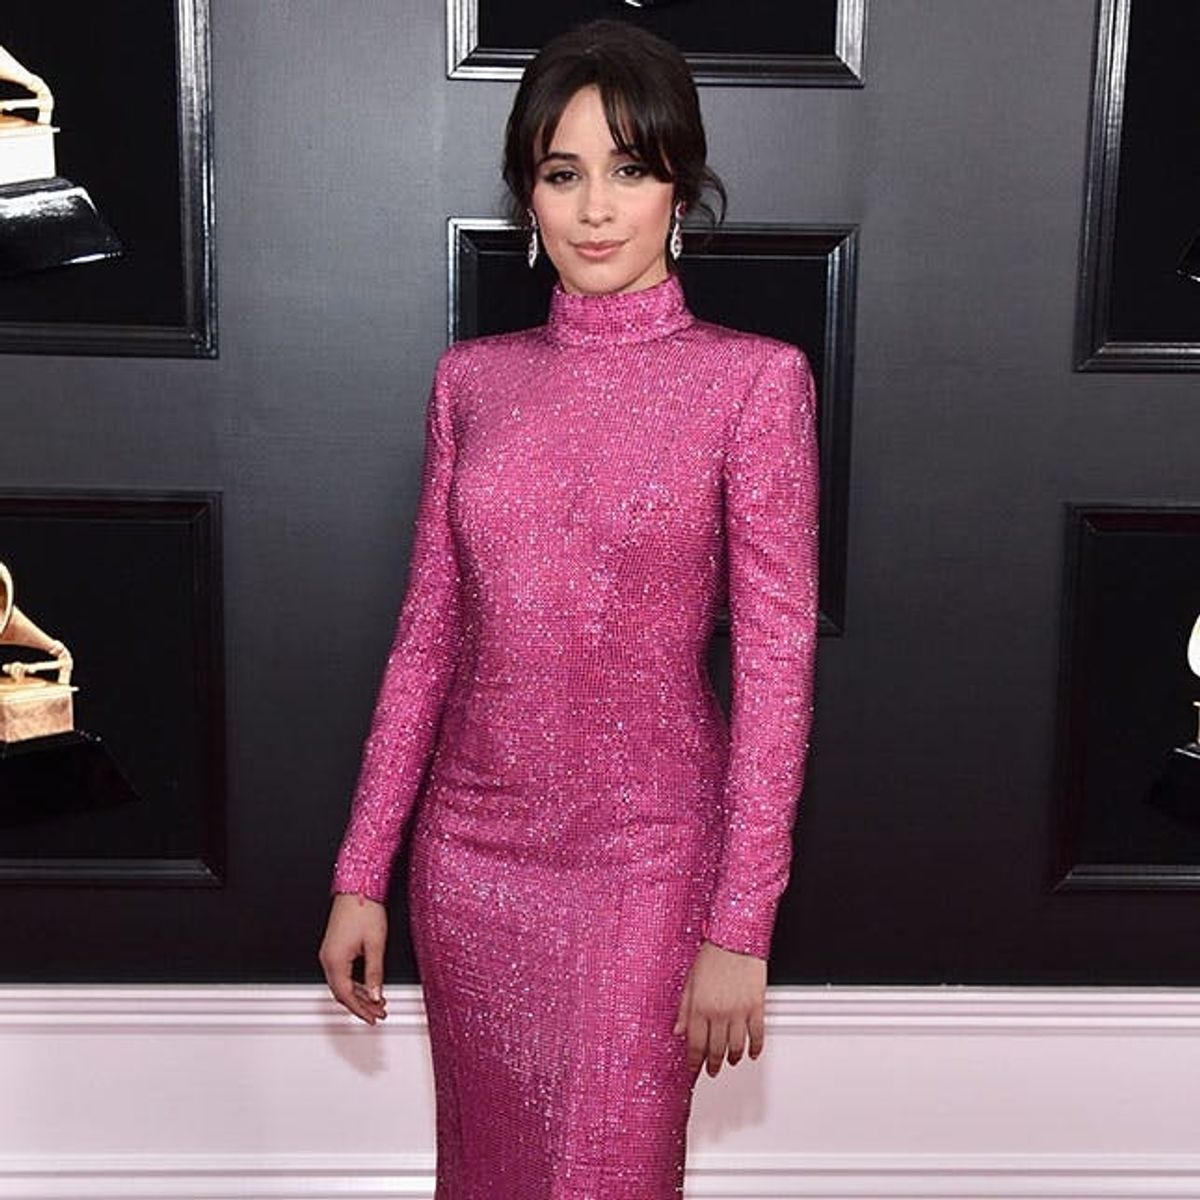 Grammys 2019 Red Carpet: The Wildest Outfits You Need to See